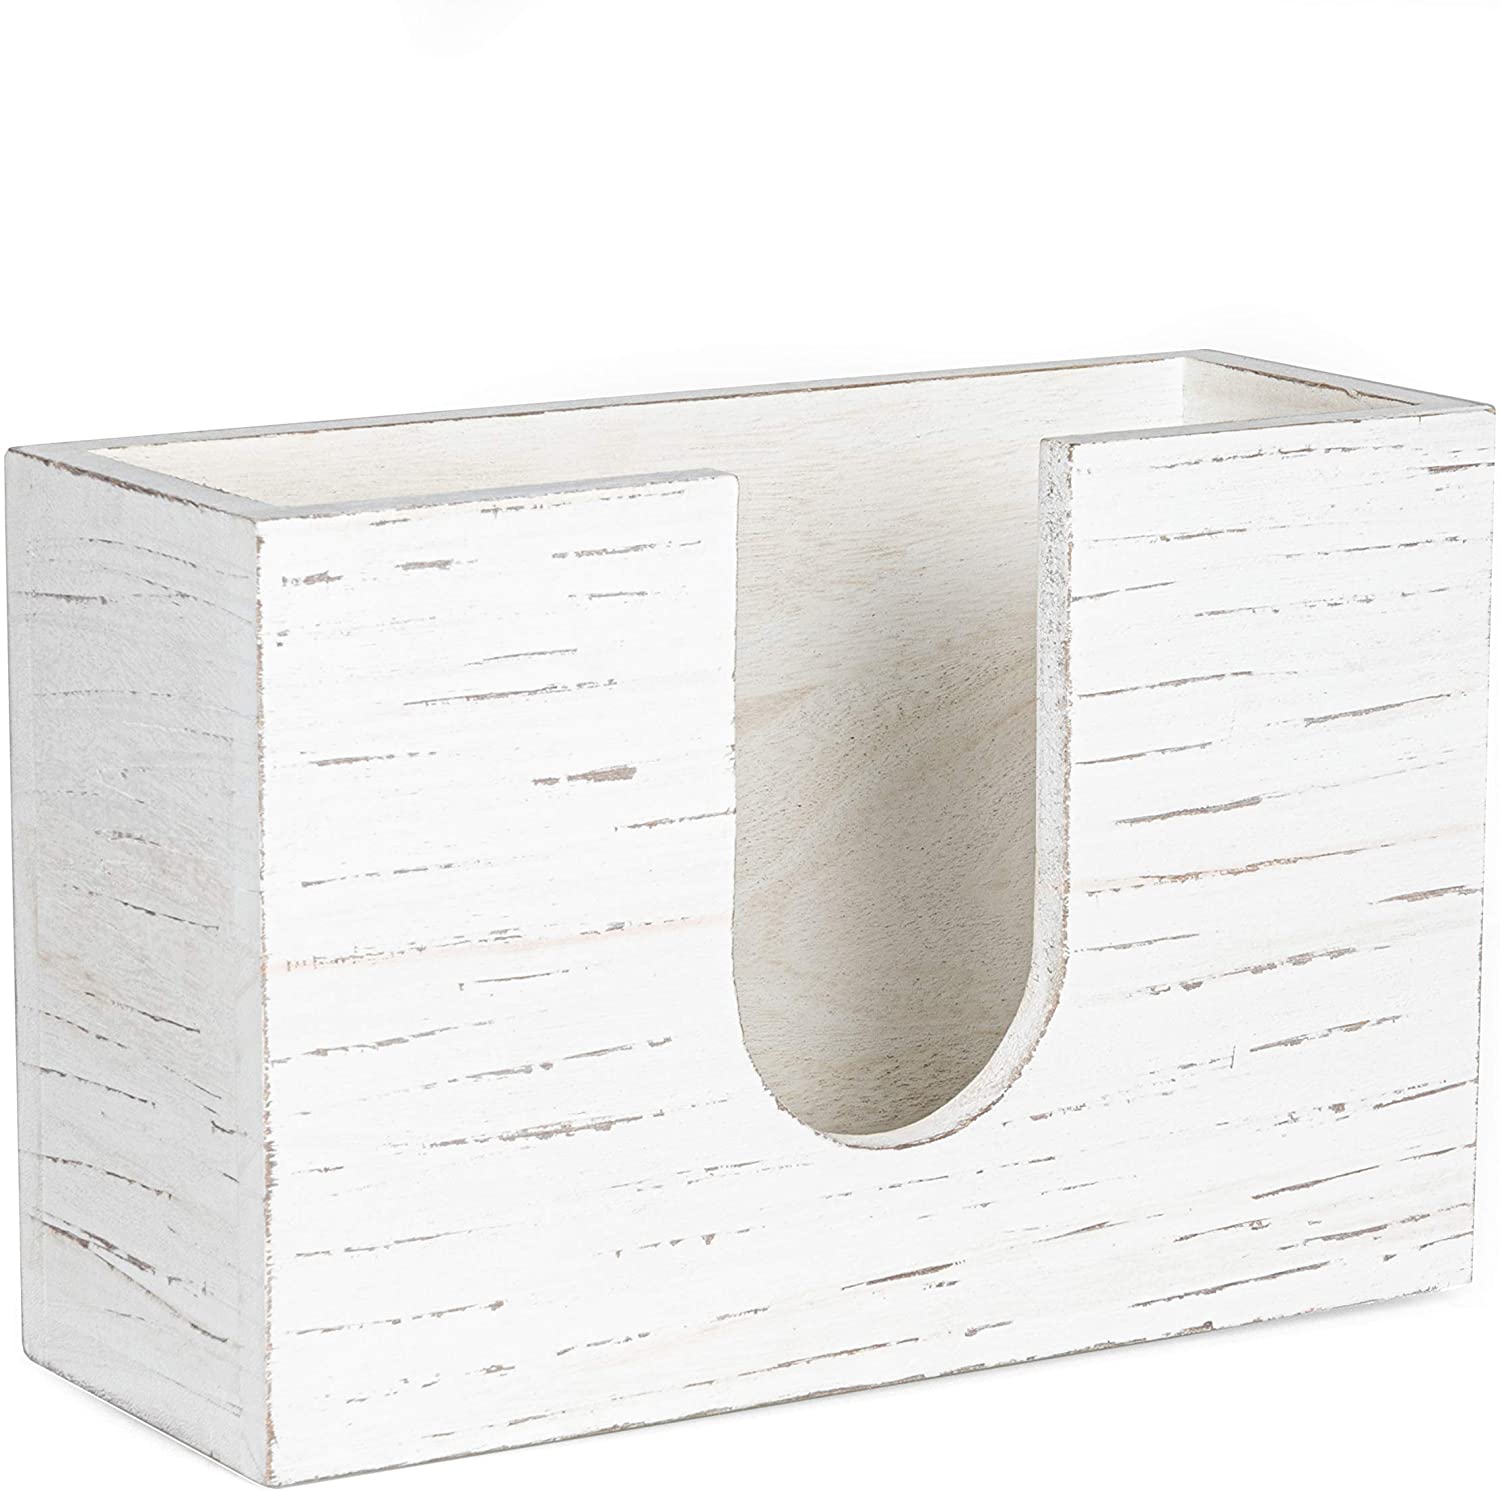 Wood Paper Towel Dispenser - Rustic Farmhouse White Wooden Multifold Hand Towel Holder